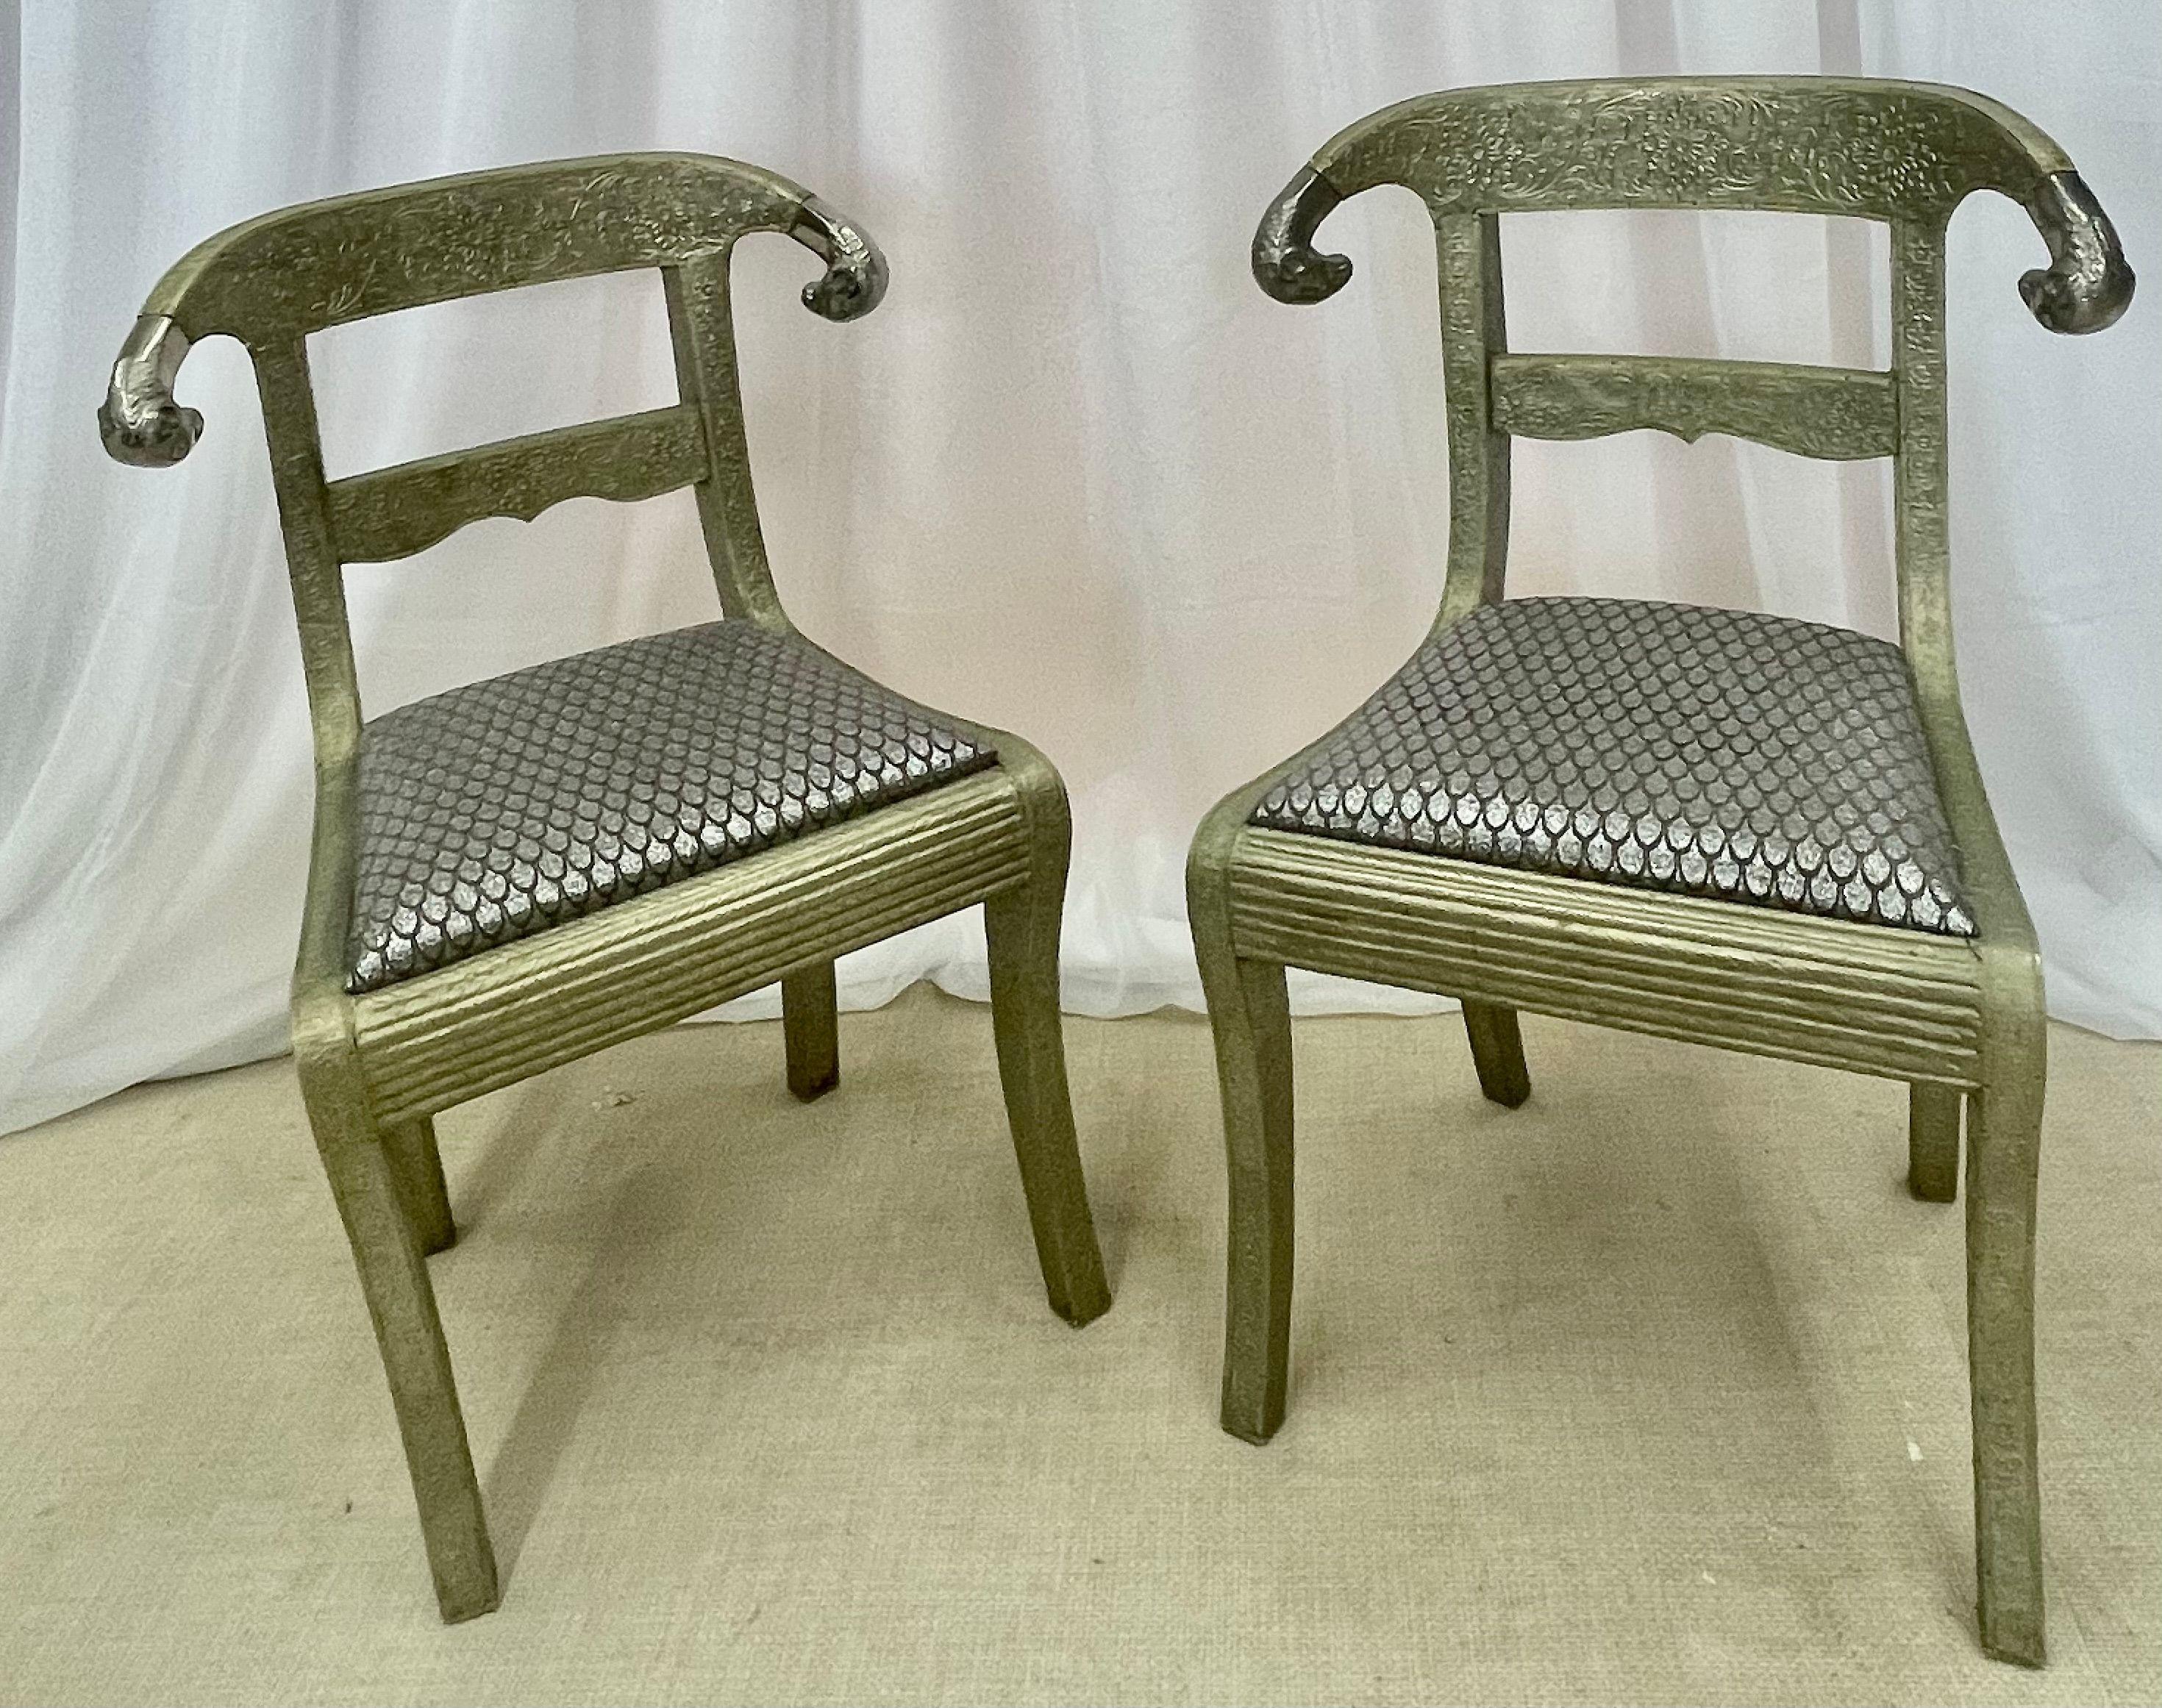 Pair of Neoclassical Side Chairs, Wrapped Metal, Rams Heads, European, Gustavian In Good Condition For Sale In Stamford, CT